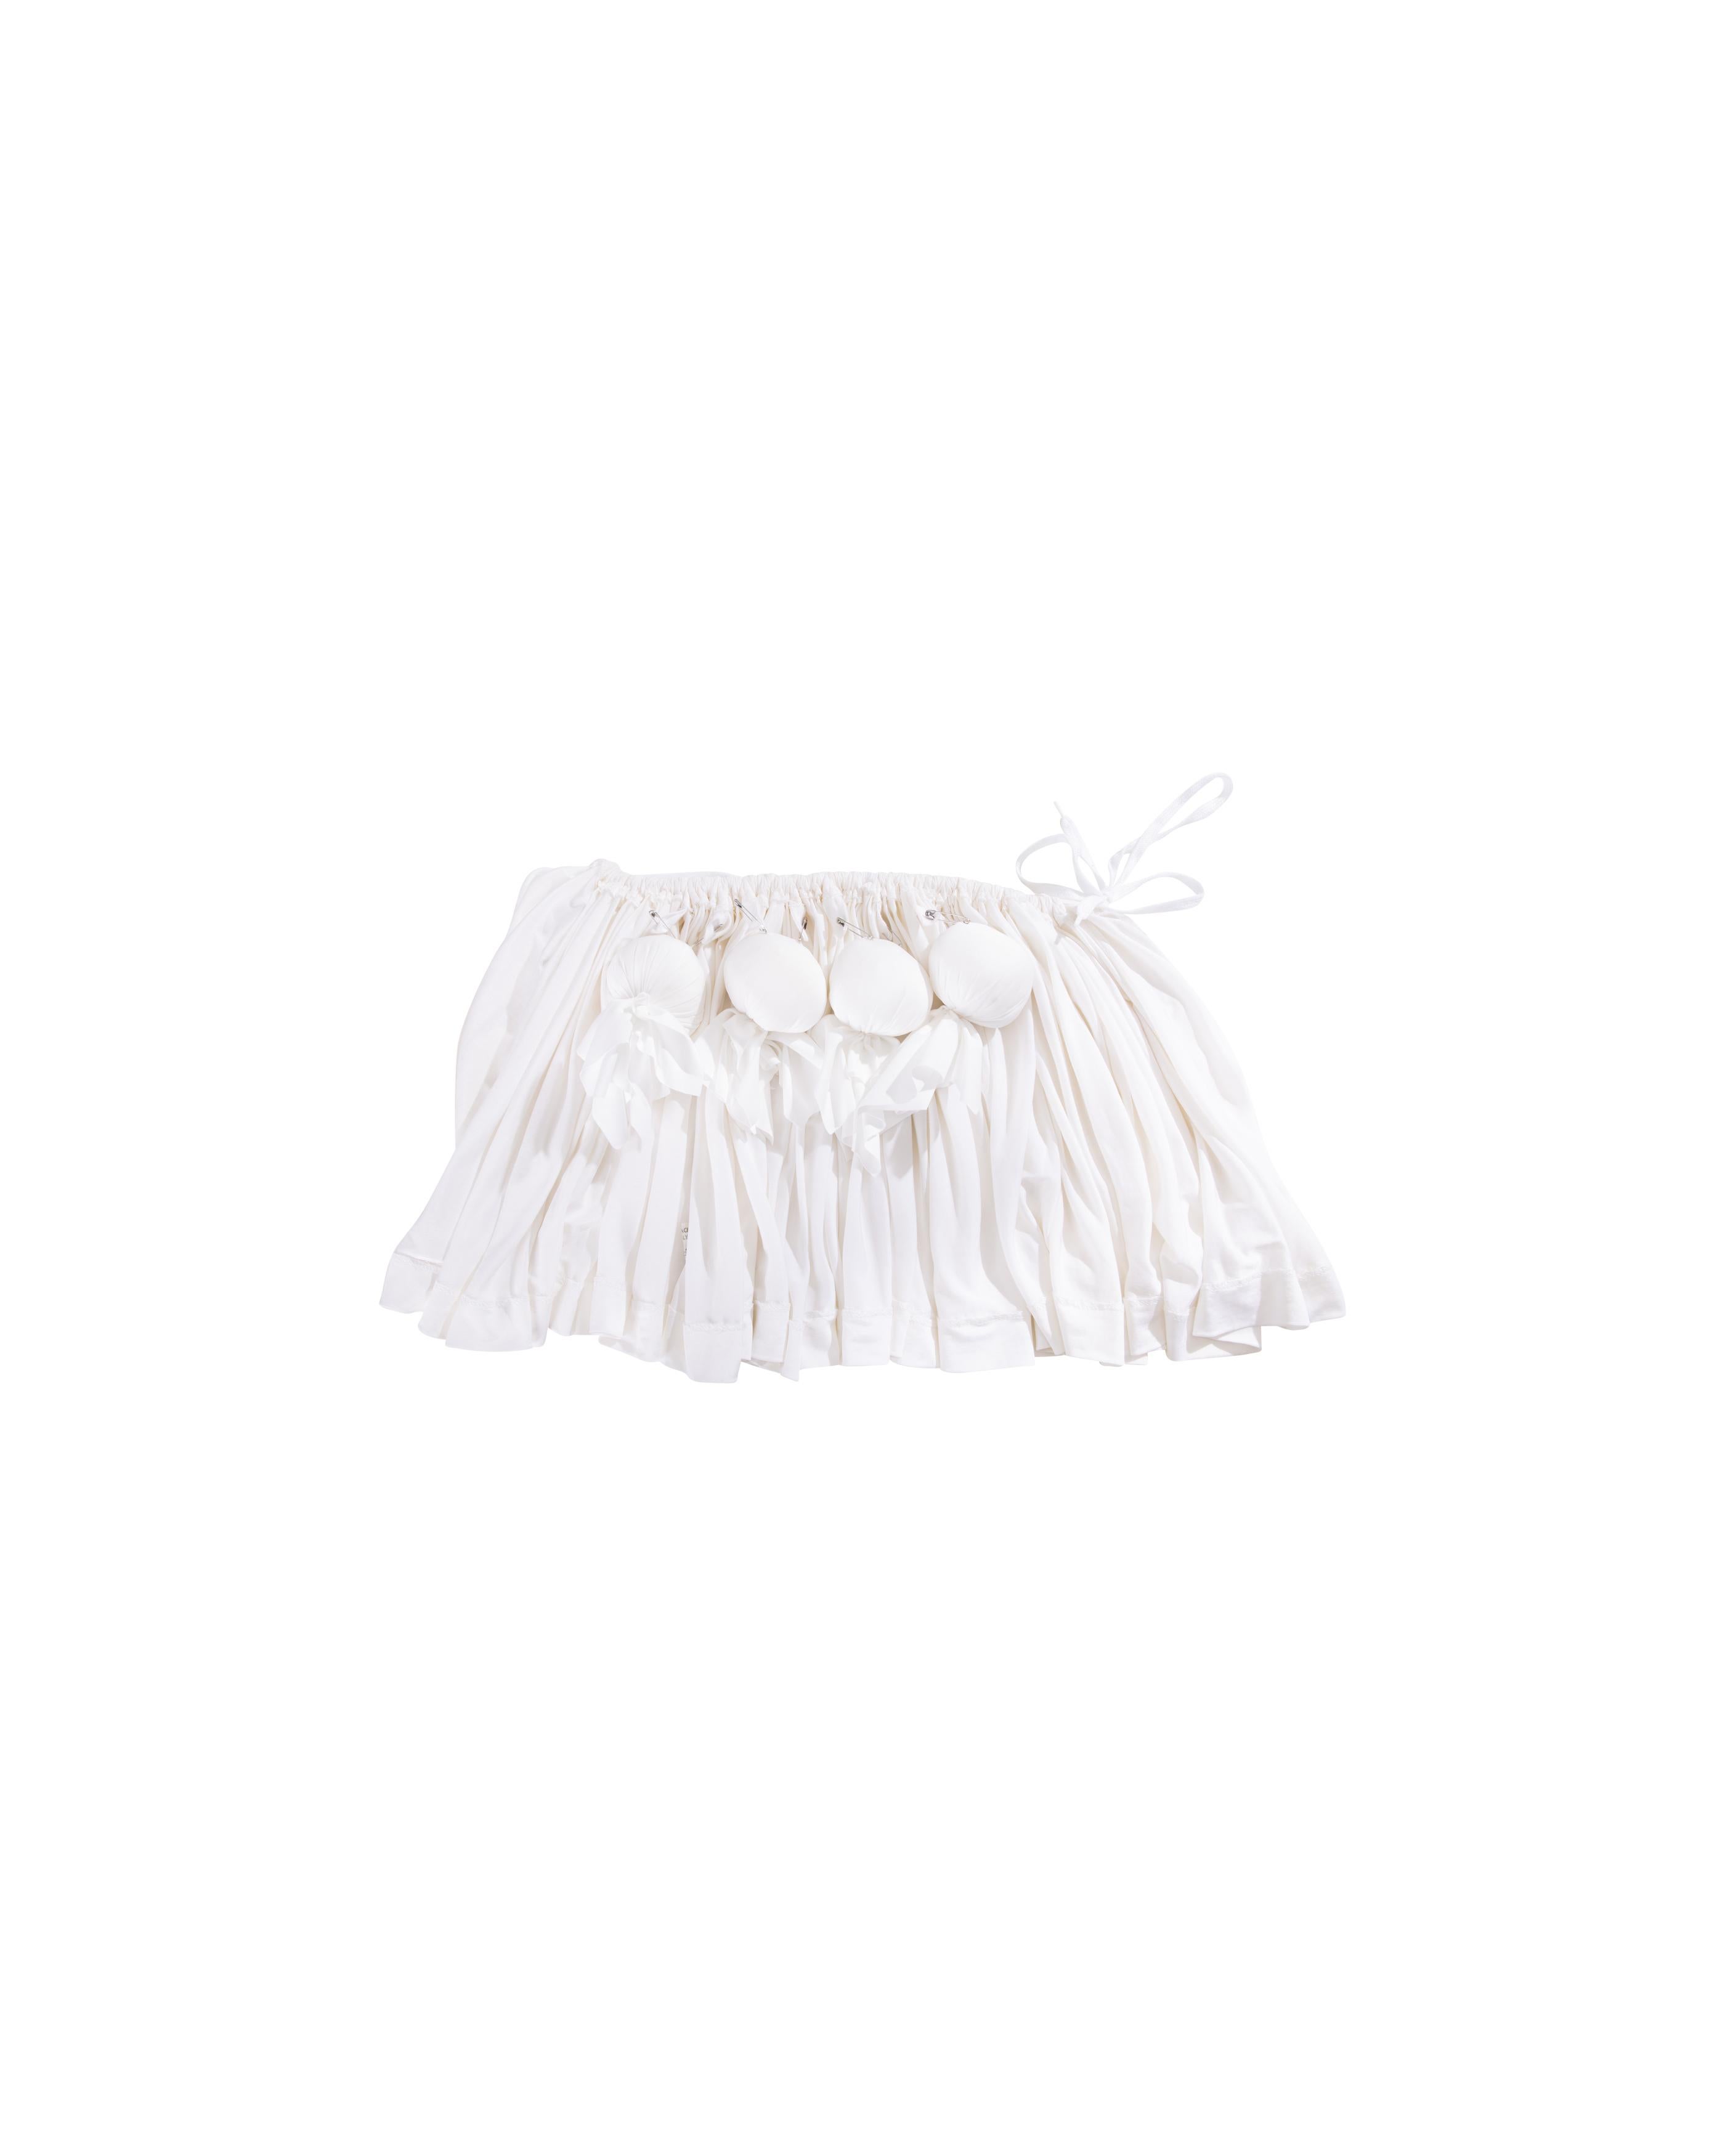 S/S 1988 Vivienne Westwood White Mini Skirt with Removable Bustle For Sale 5